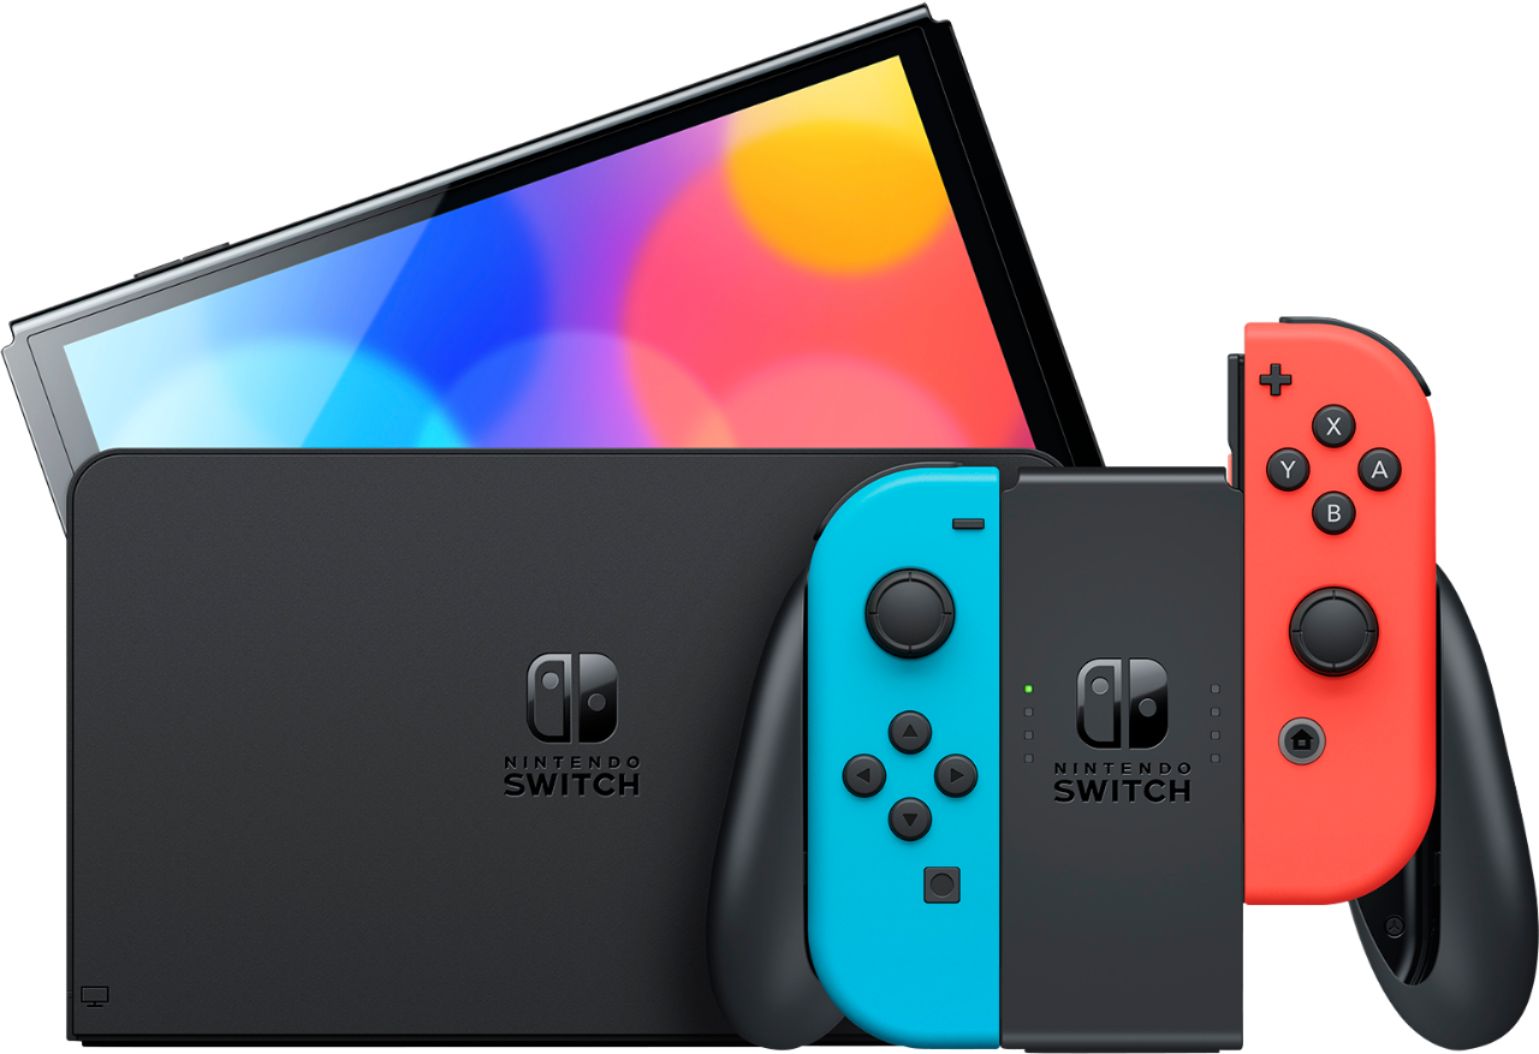 2022 New Nintendo Switch OLED Model Neon Red Blue with Super Mario Party and Mytrix Full Body Skin Sticker for NS OLED Console, Dock and Joycons - Sakura Pink